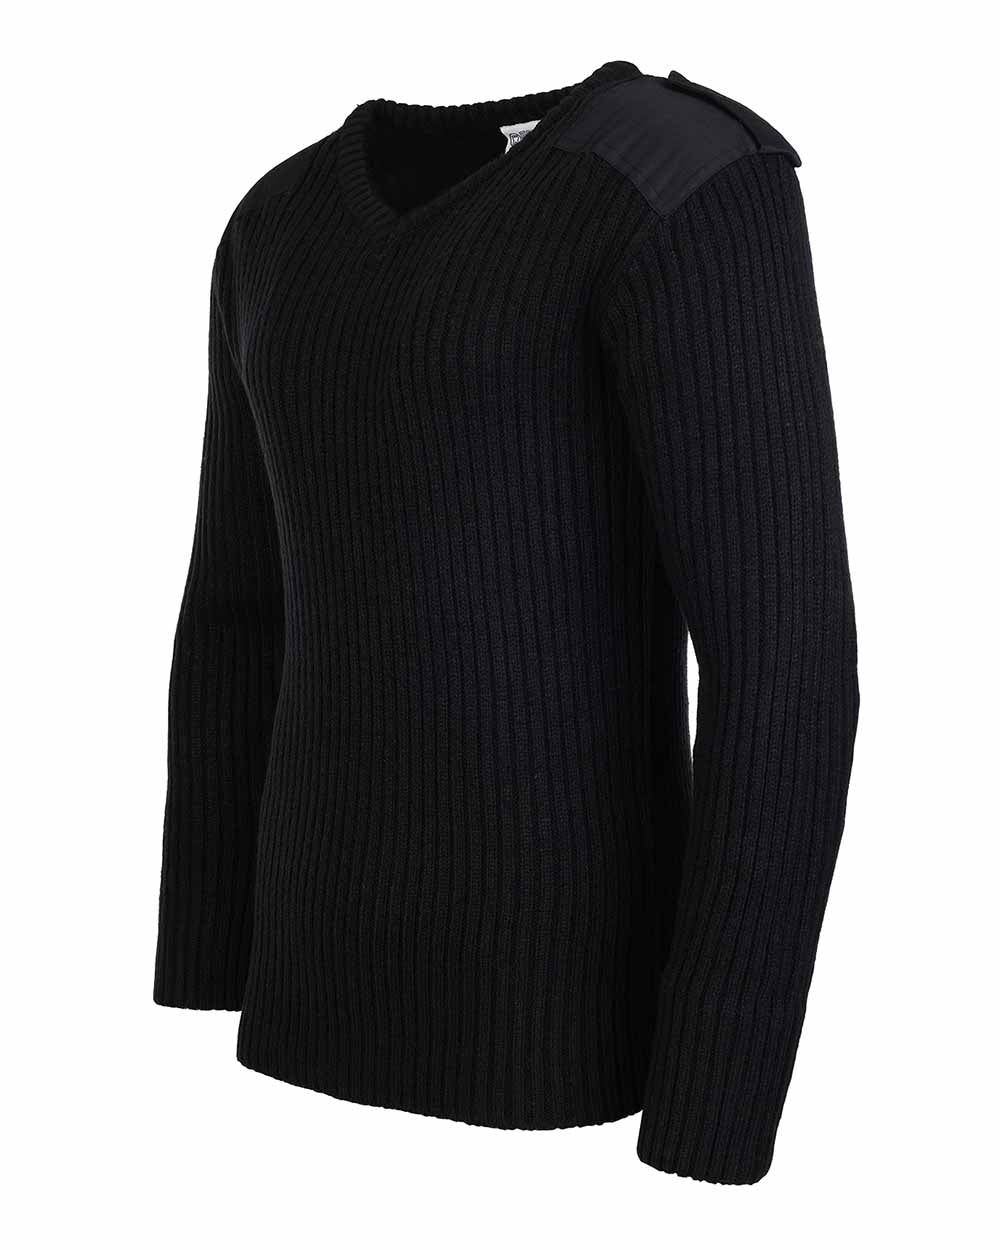 Vee Neck Military Style Jumper by Fort 